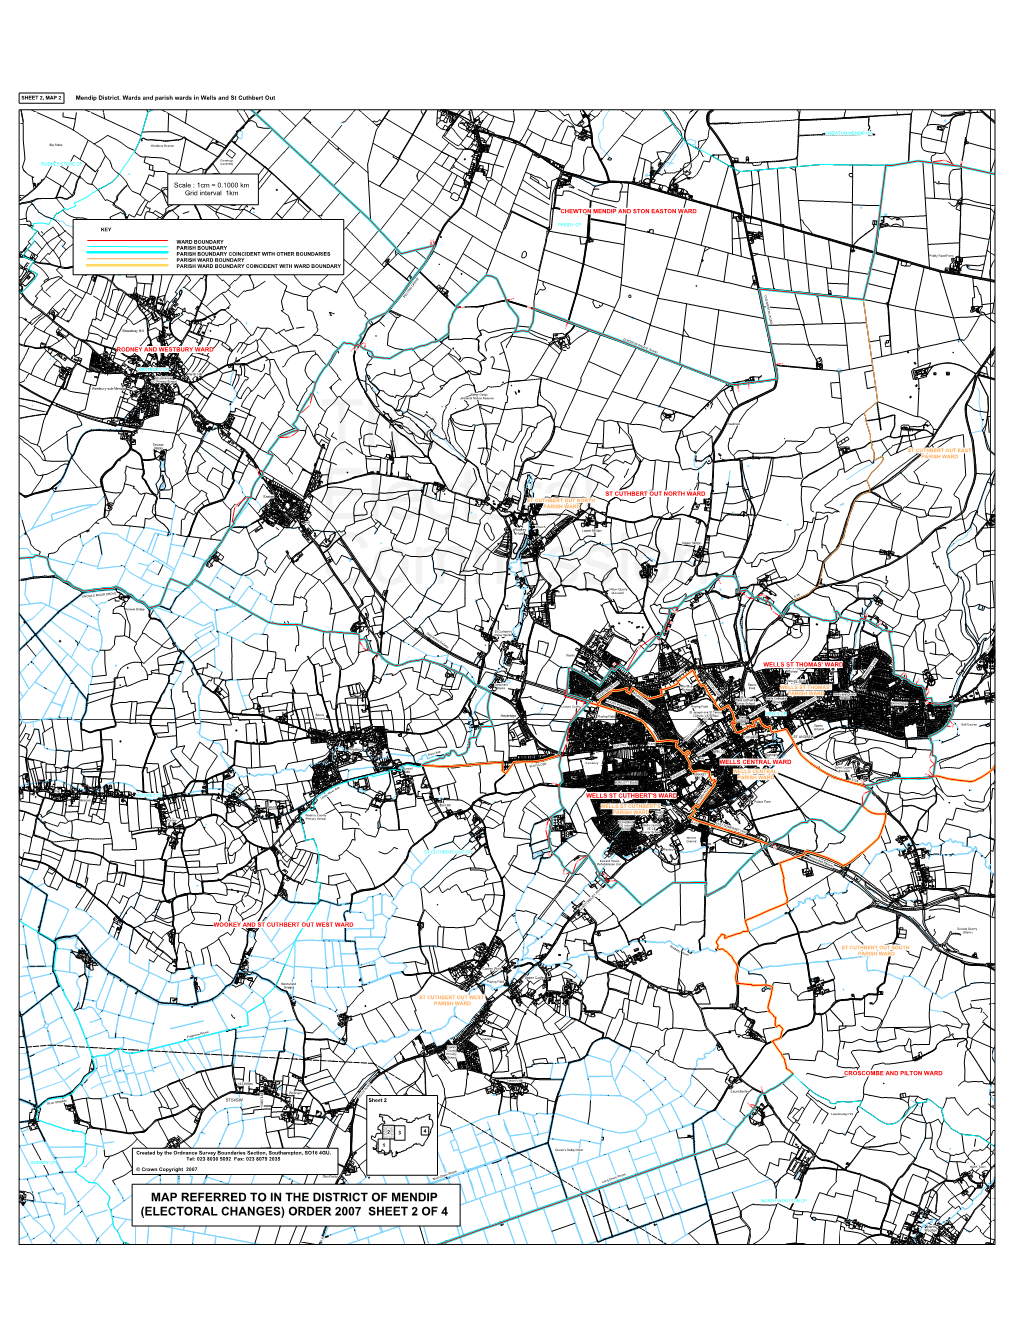 Map Referred to in the District of Mendip North Wootton Cp (Electoral Changes) Order 2007 Sheet 2 of 4